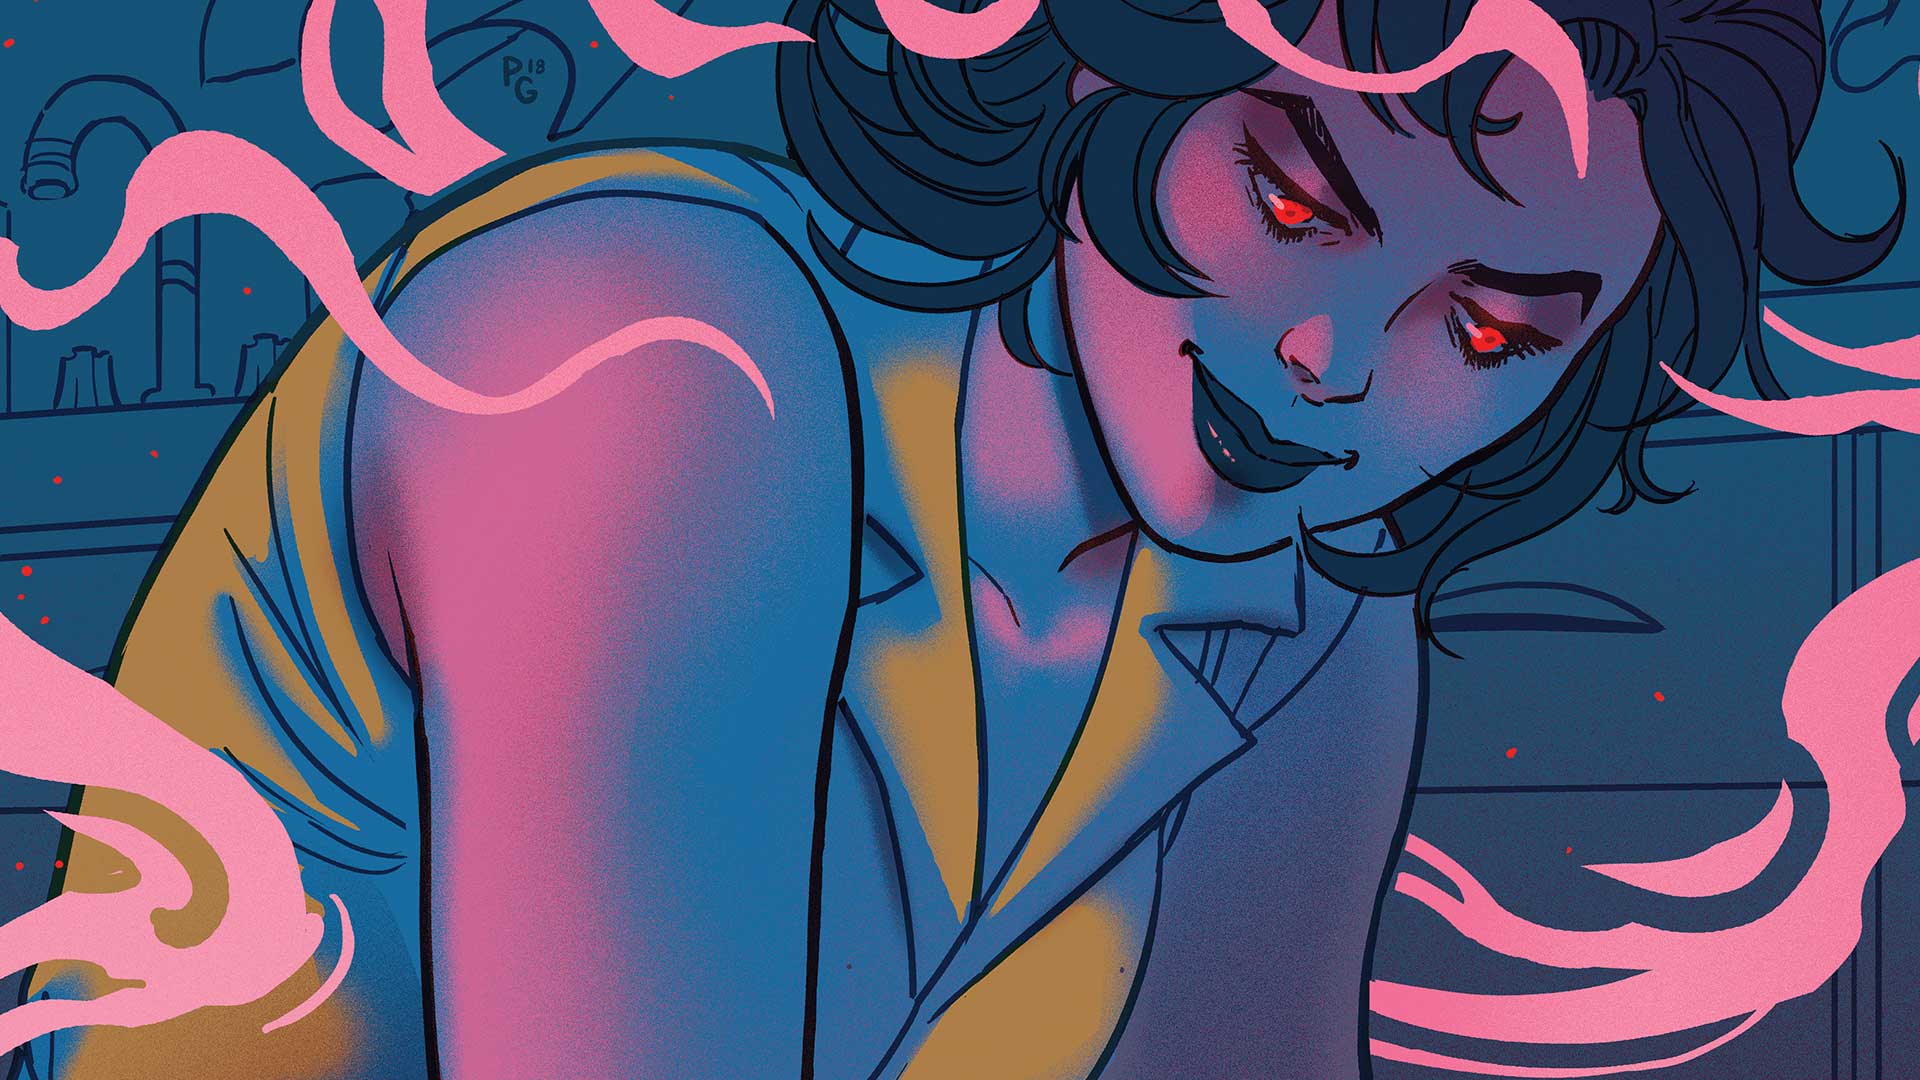 Hex Wives #4 Review: Blood magic is in the air